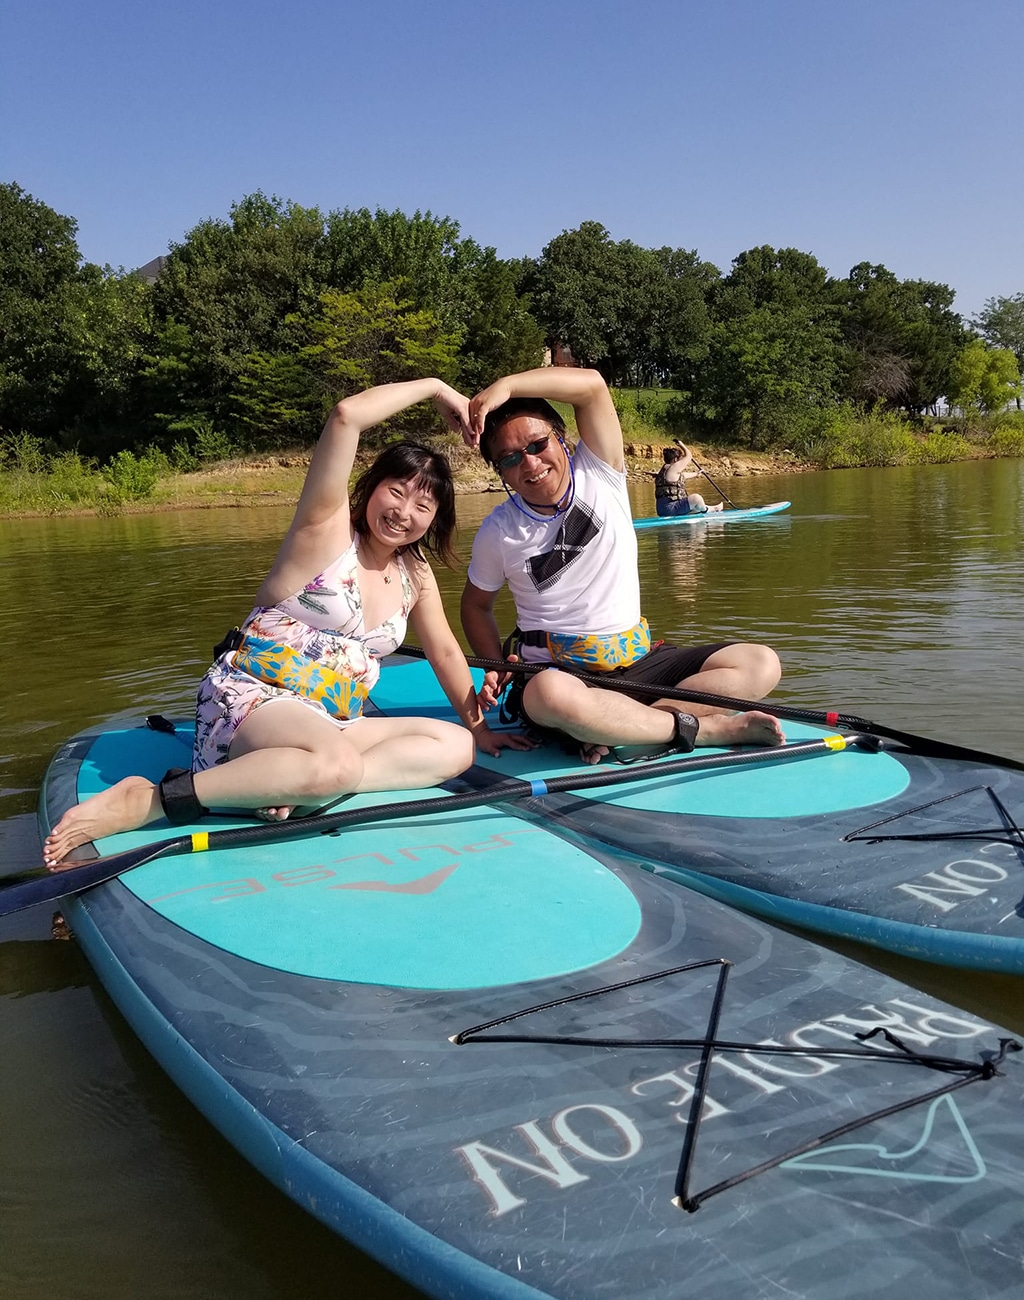 Bluet Sup couples at the lake event